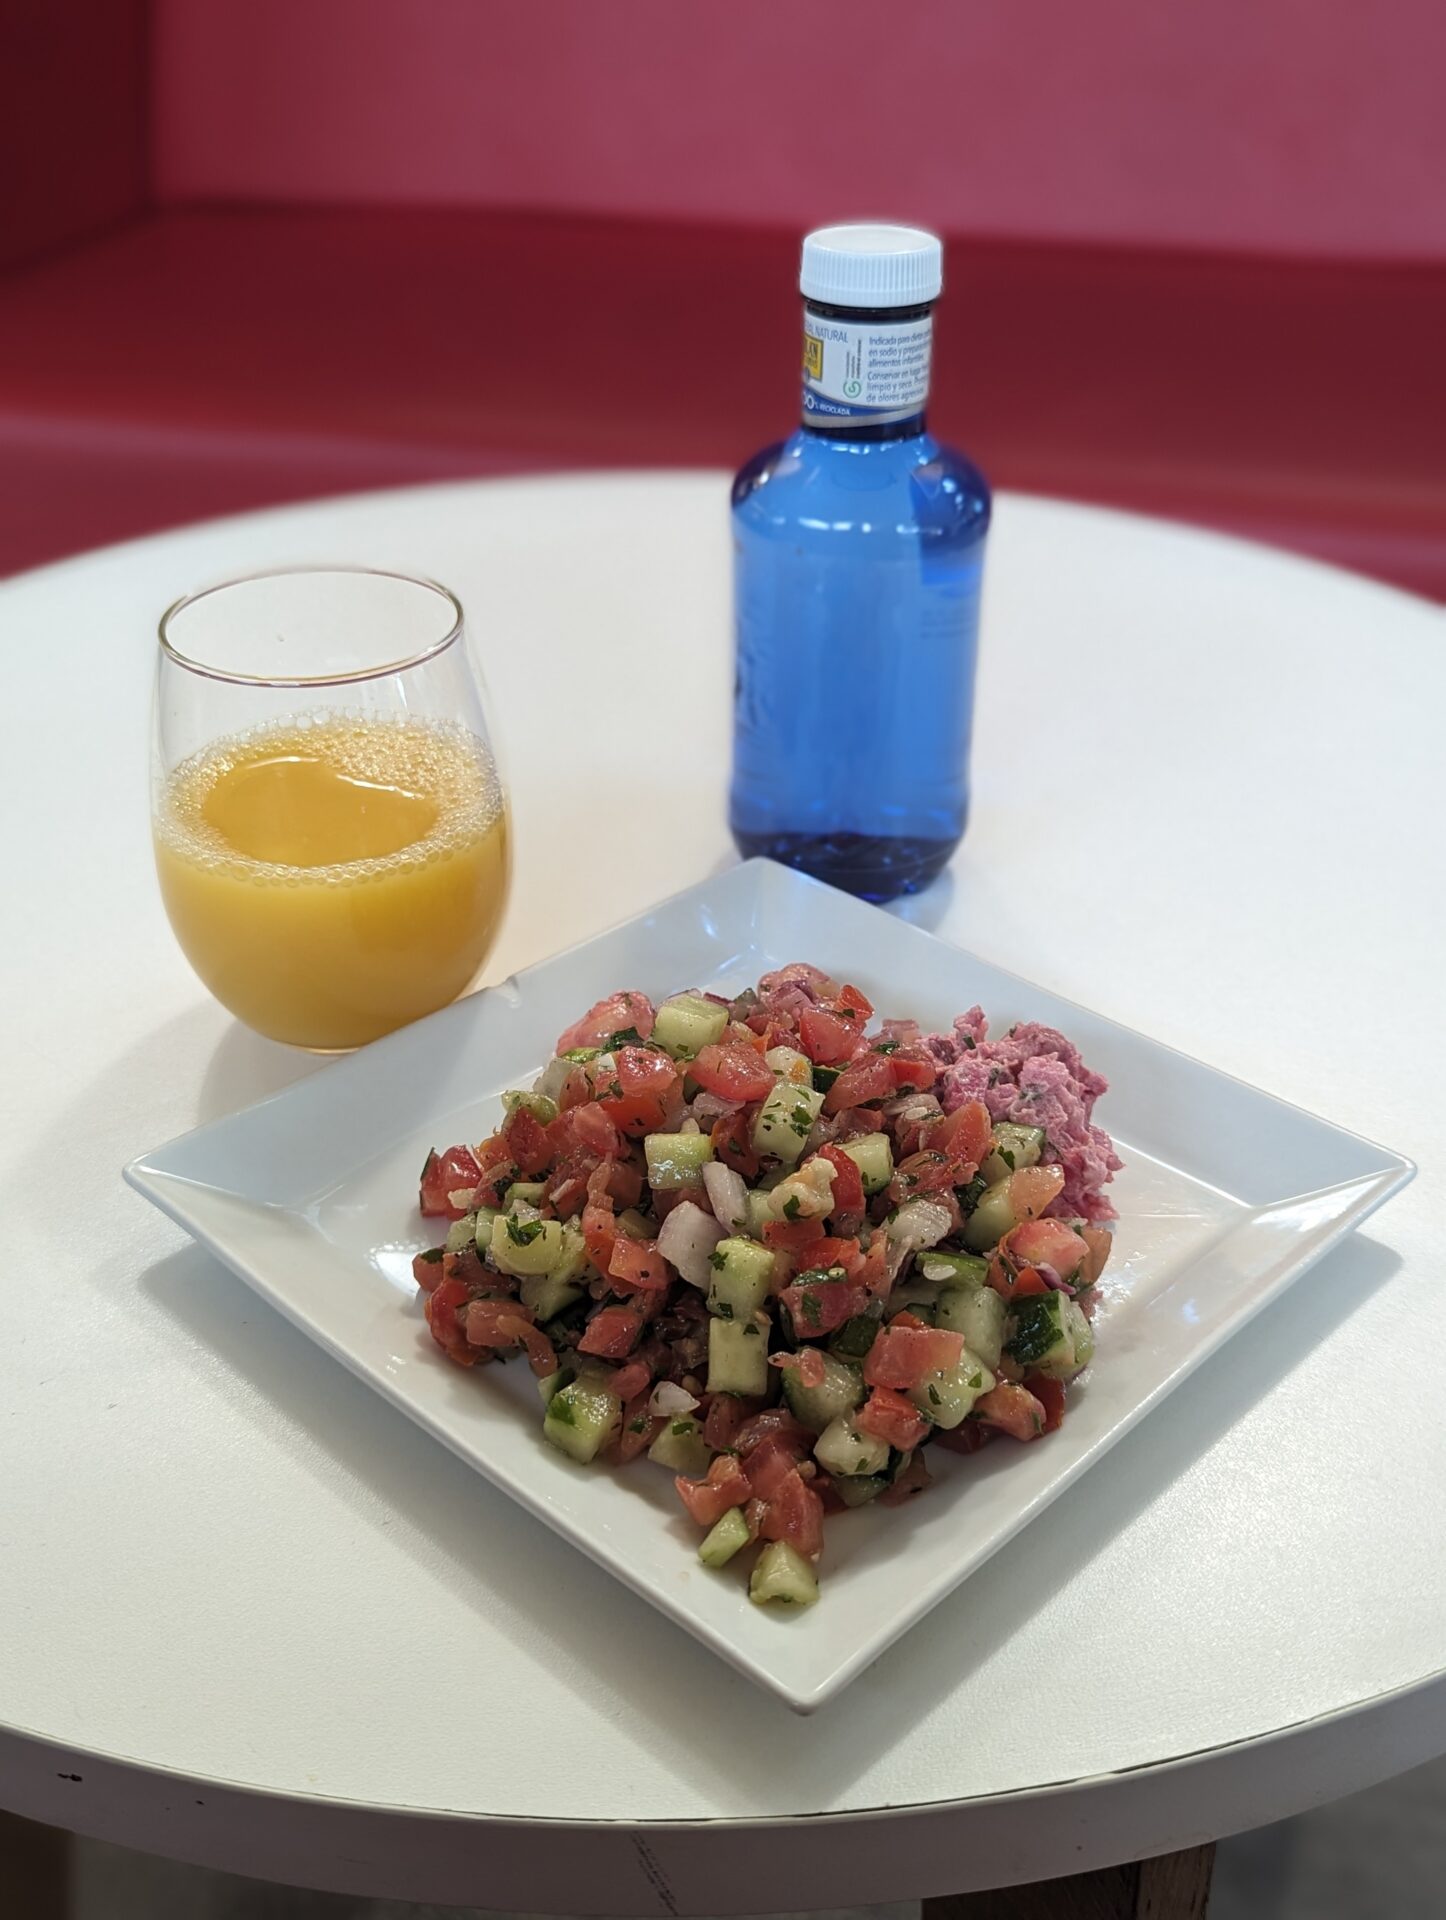 a plate of salad and a glass of juice